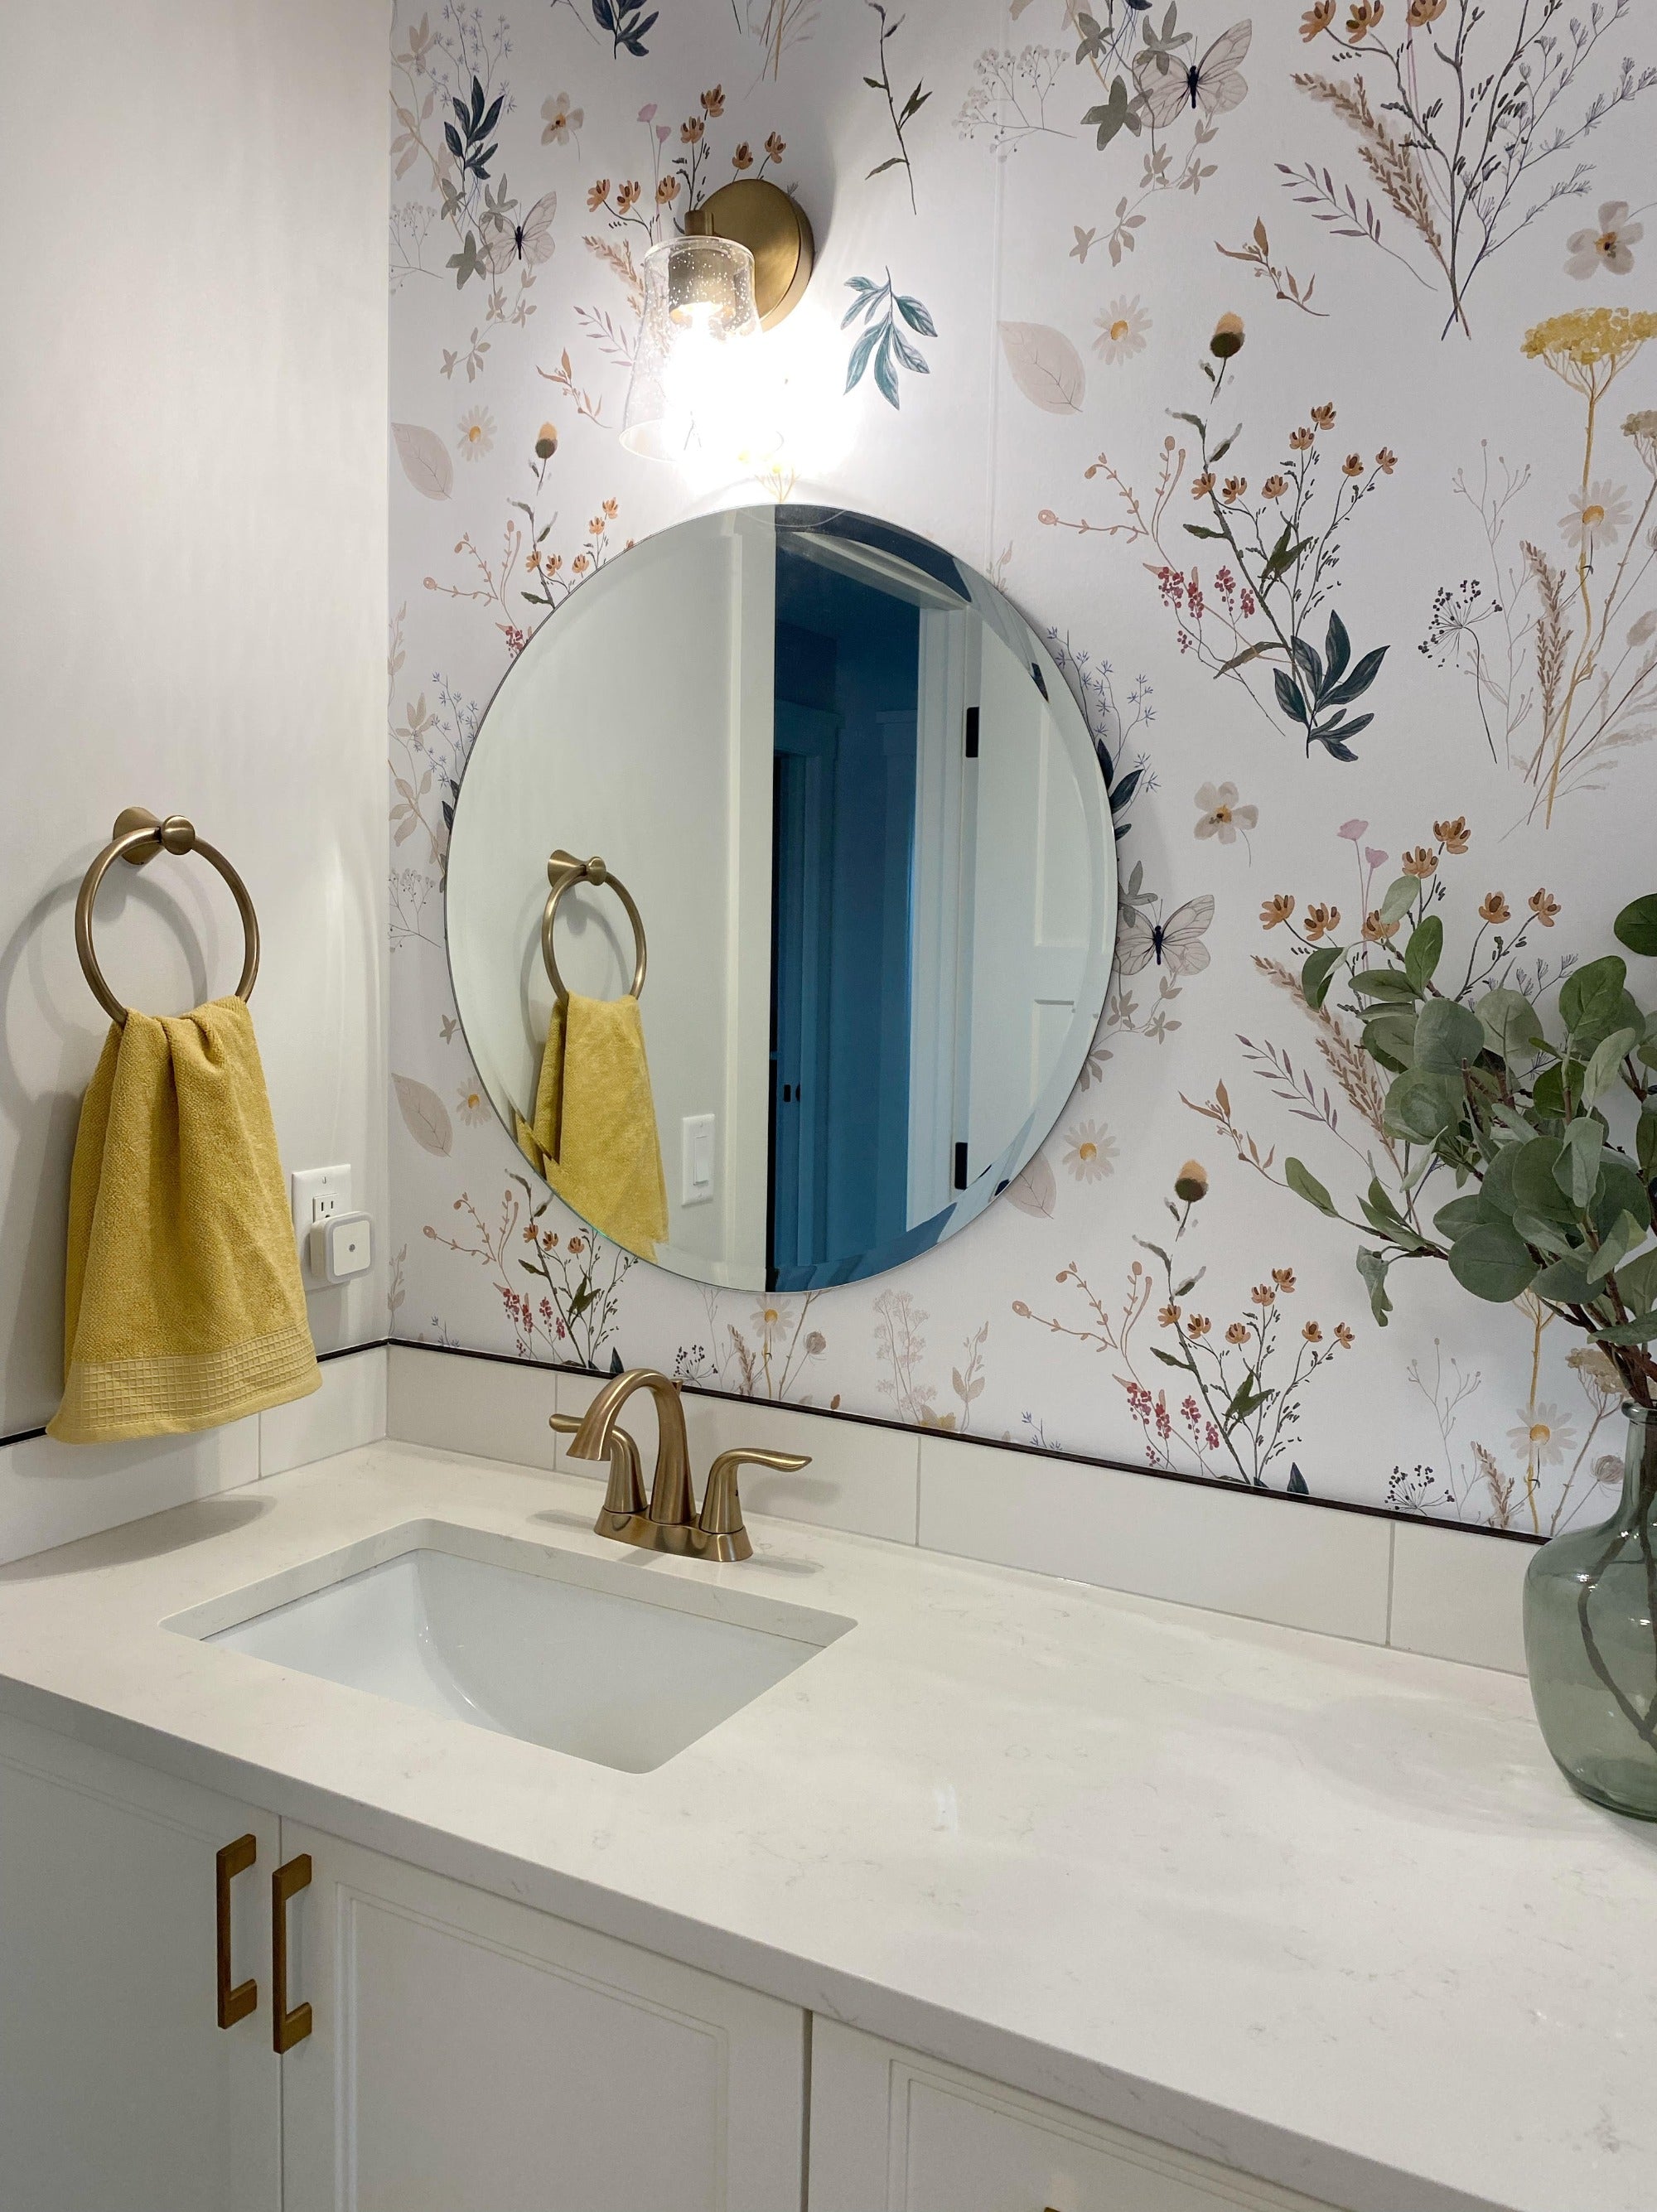 A bright bathroom interior with botanical-themed wallpaper showcasing wildflowers and foliage in muted colors. The space includes a white vanity with dual sinks, gold fixtures, round mirrors, and decorative touches such as a 'brush your teeth' sign and yellow towels.